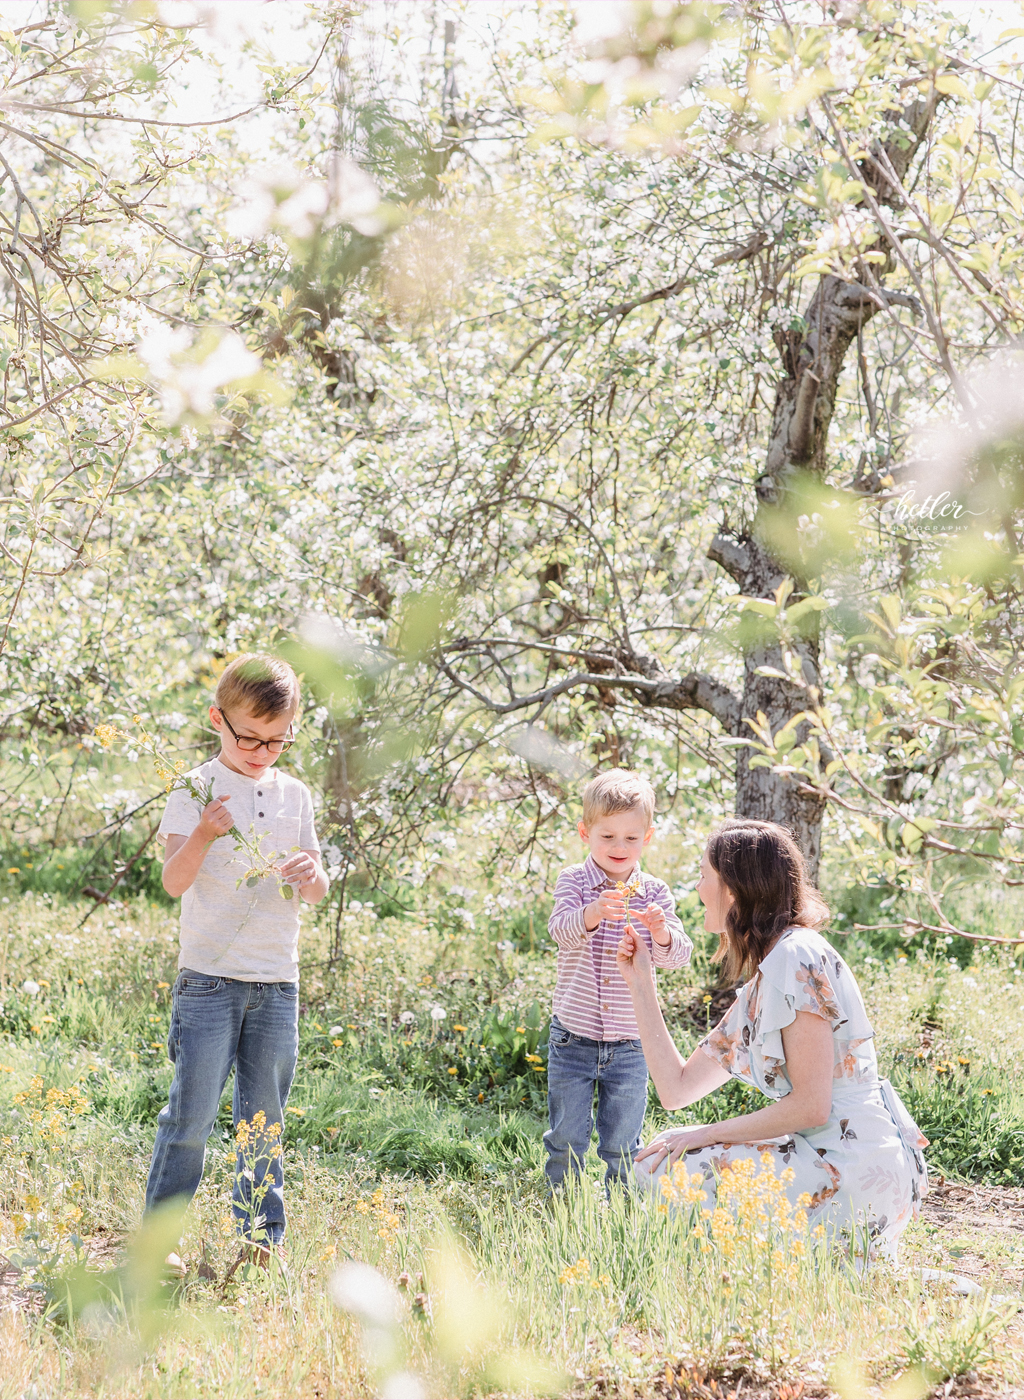 Spring family photo session at the apple orchard full of blossoms in Sparta Michigan 